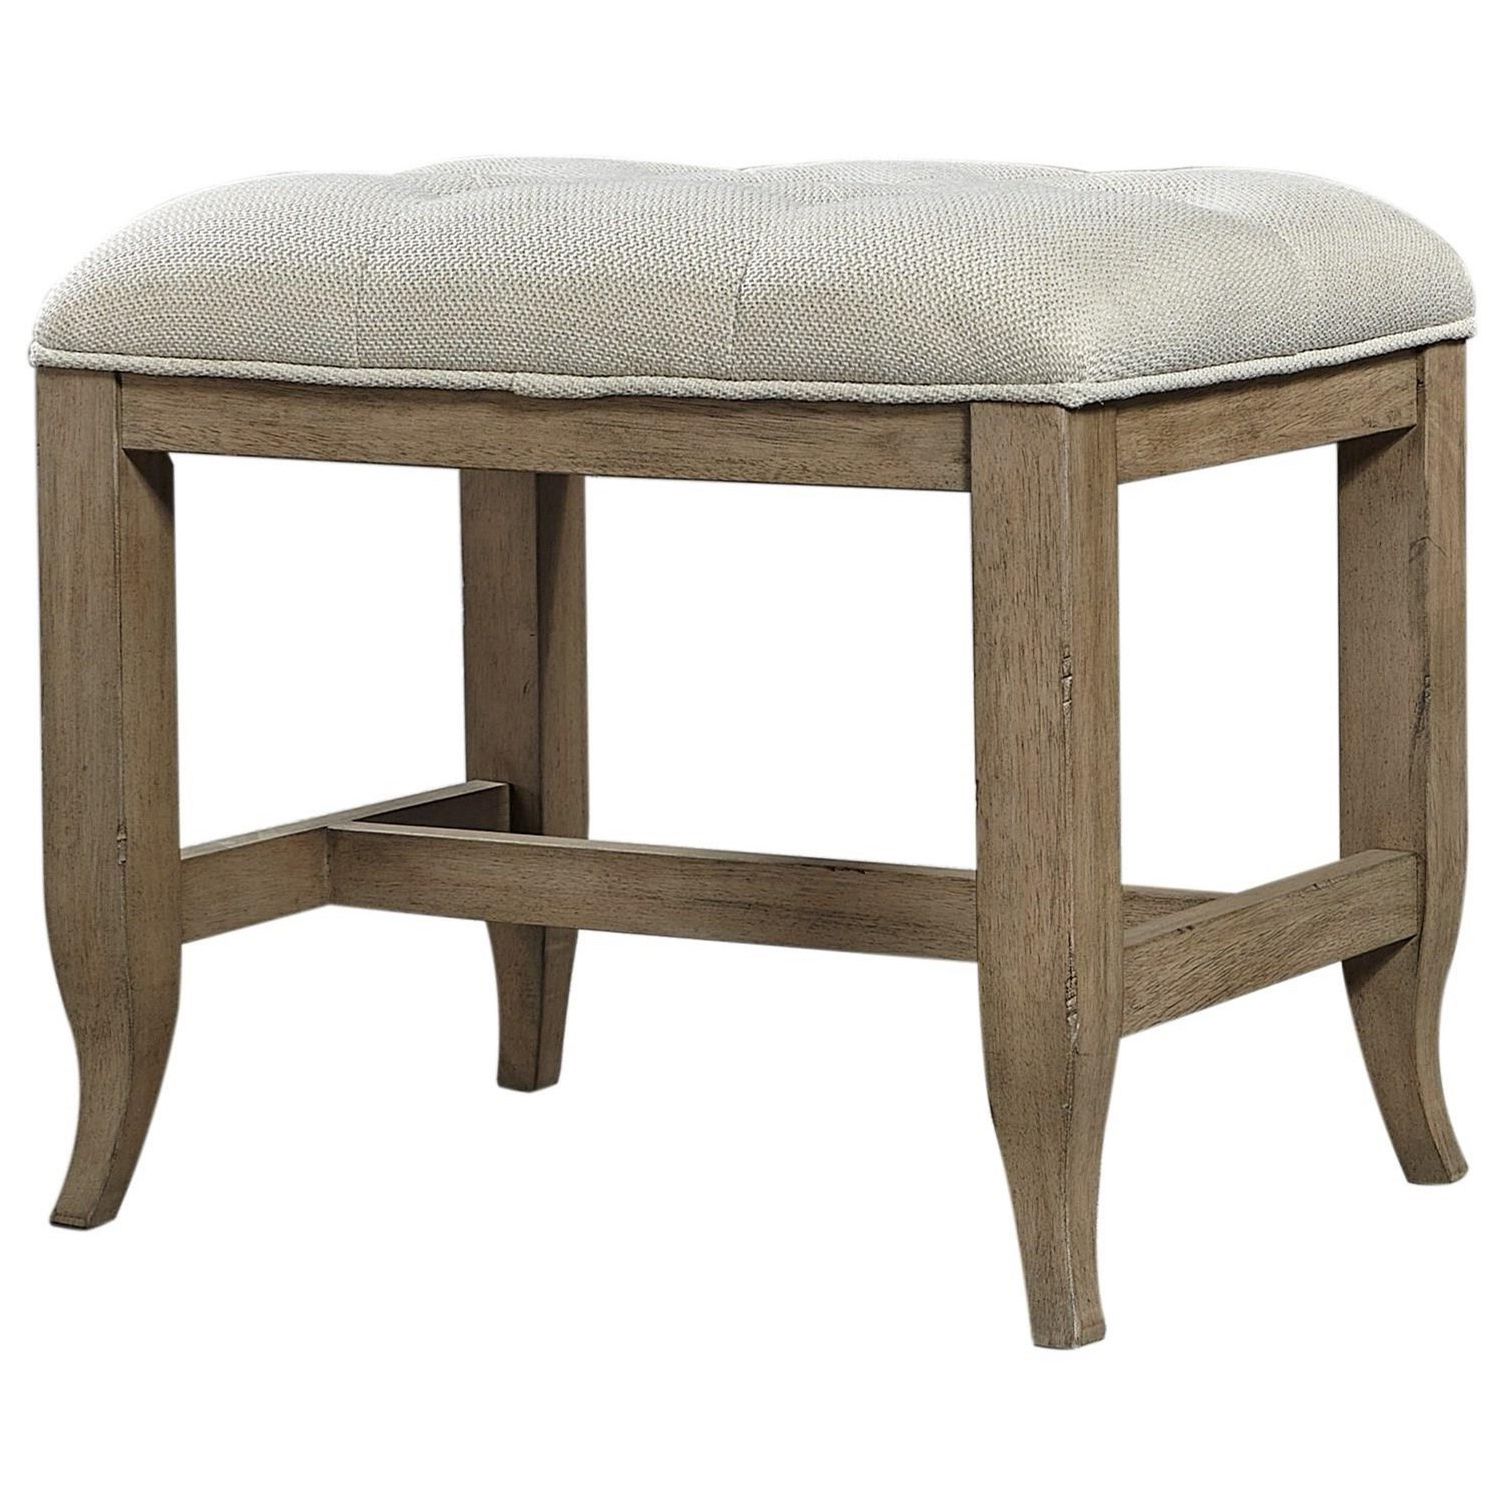 Provence Accent Dining Tables Pertaining To Popular Aspenhome Provence Casual Bench With Button Tufted (View 19 of 25)